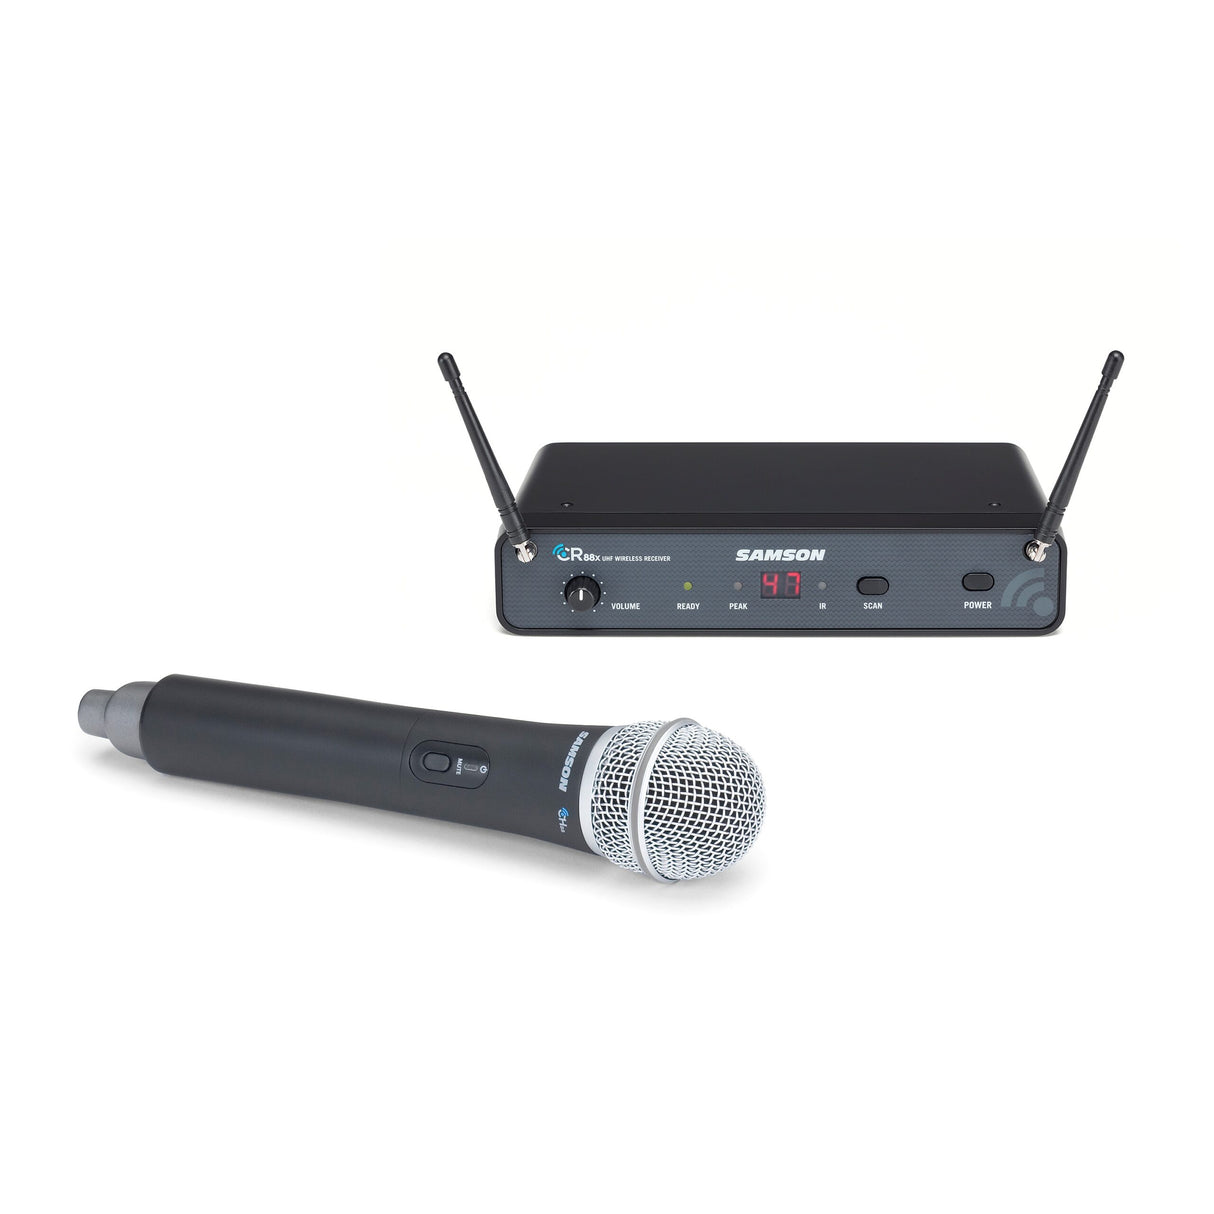 Samson Concert 88x Wireless Handheld System with Q7 Handheld Dynamic Microphone, D 542-566 MHz